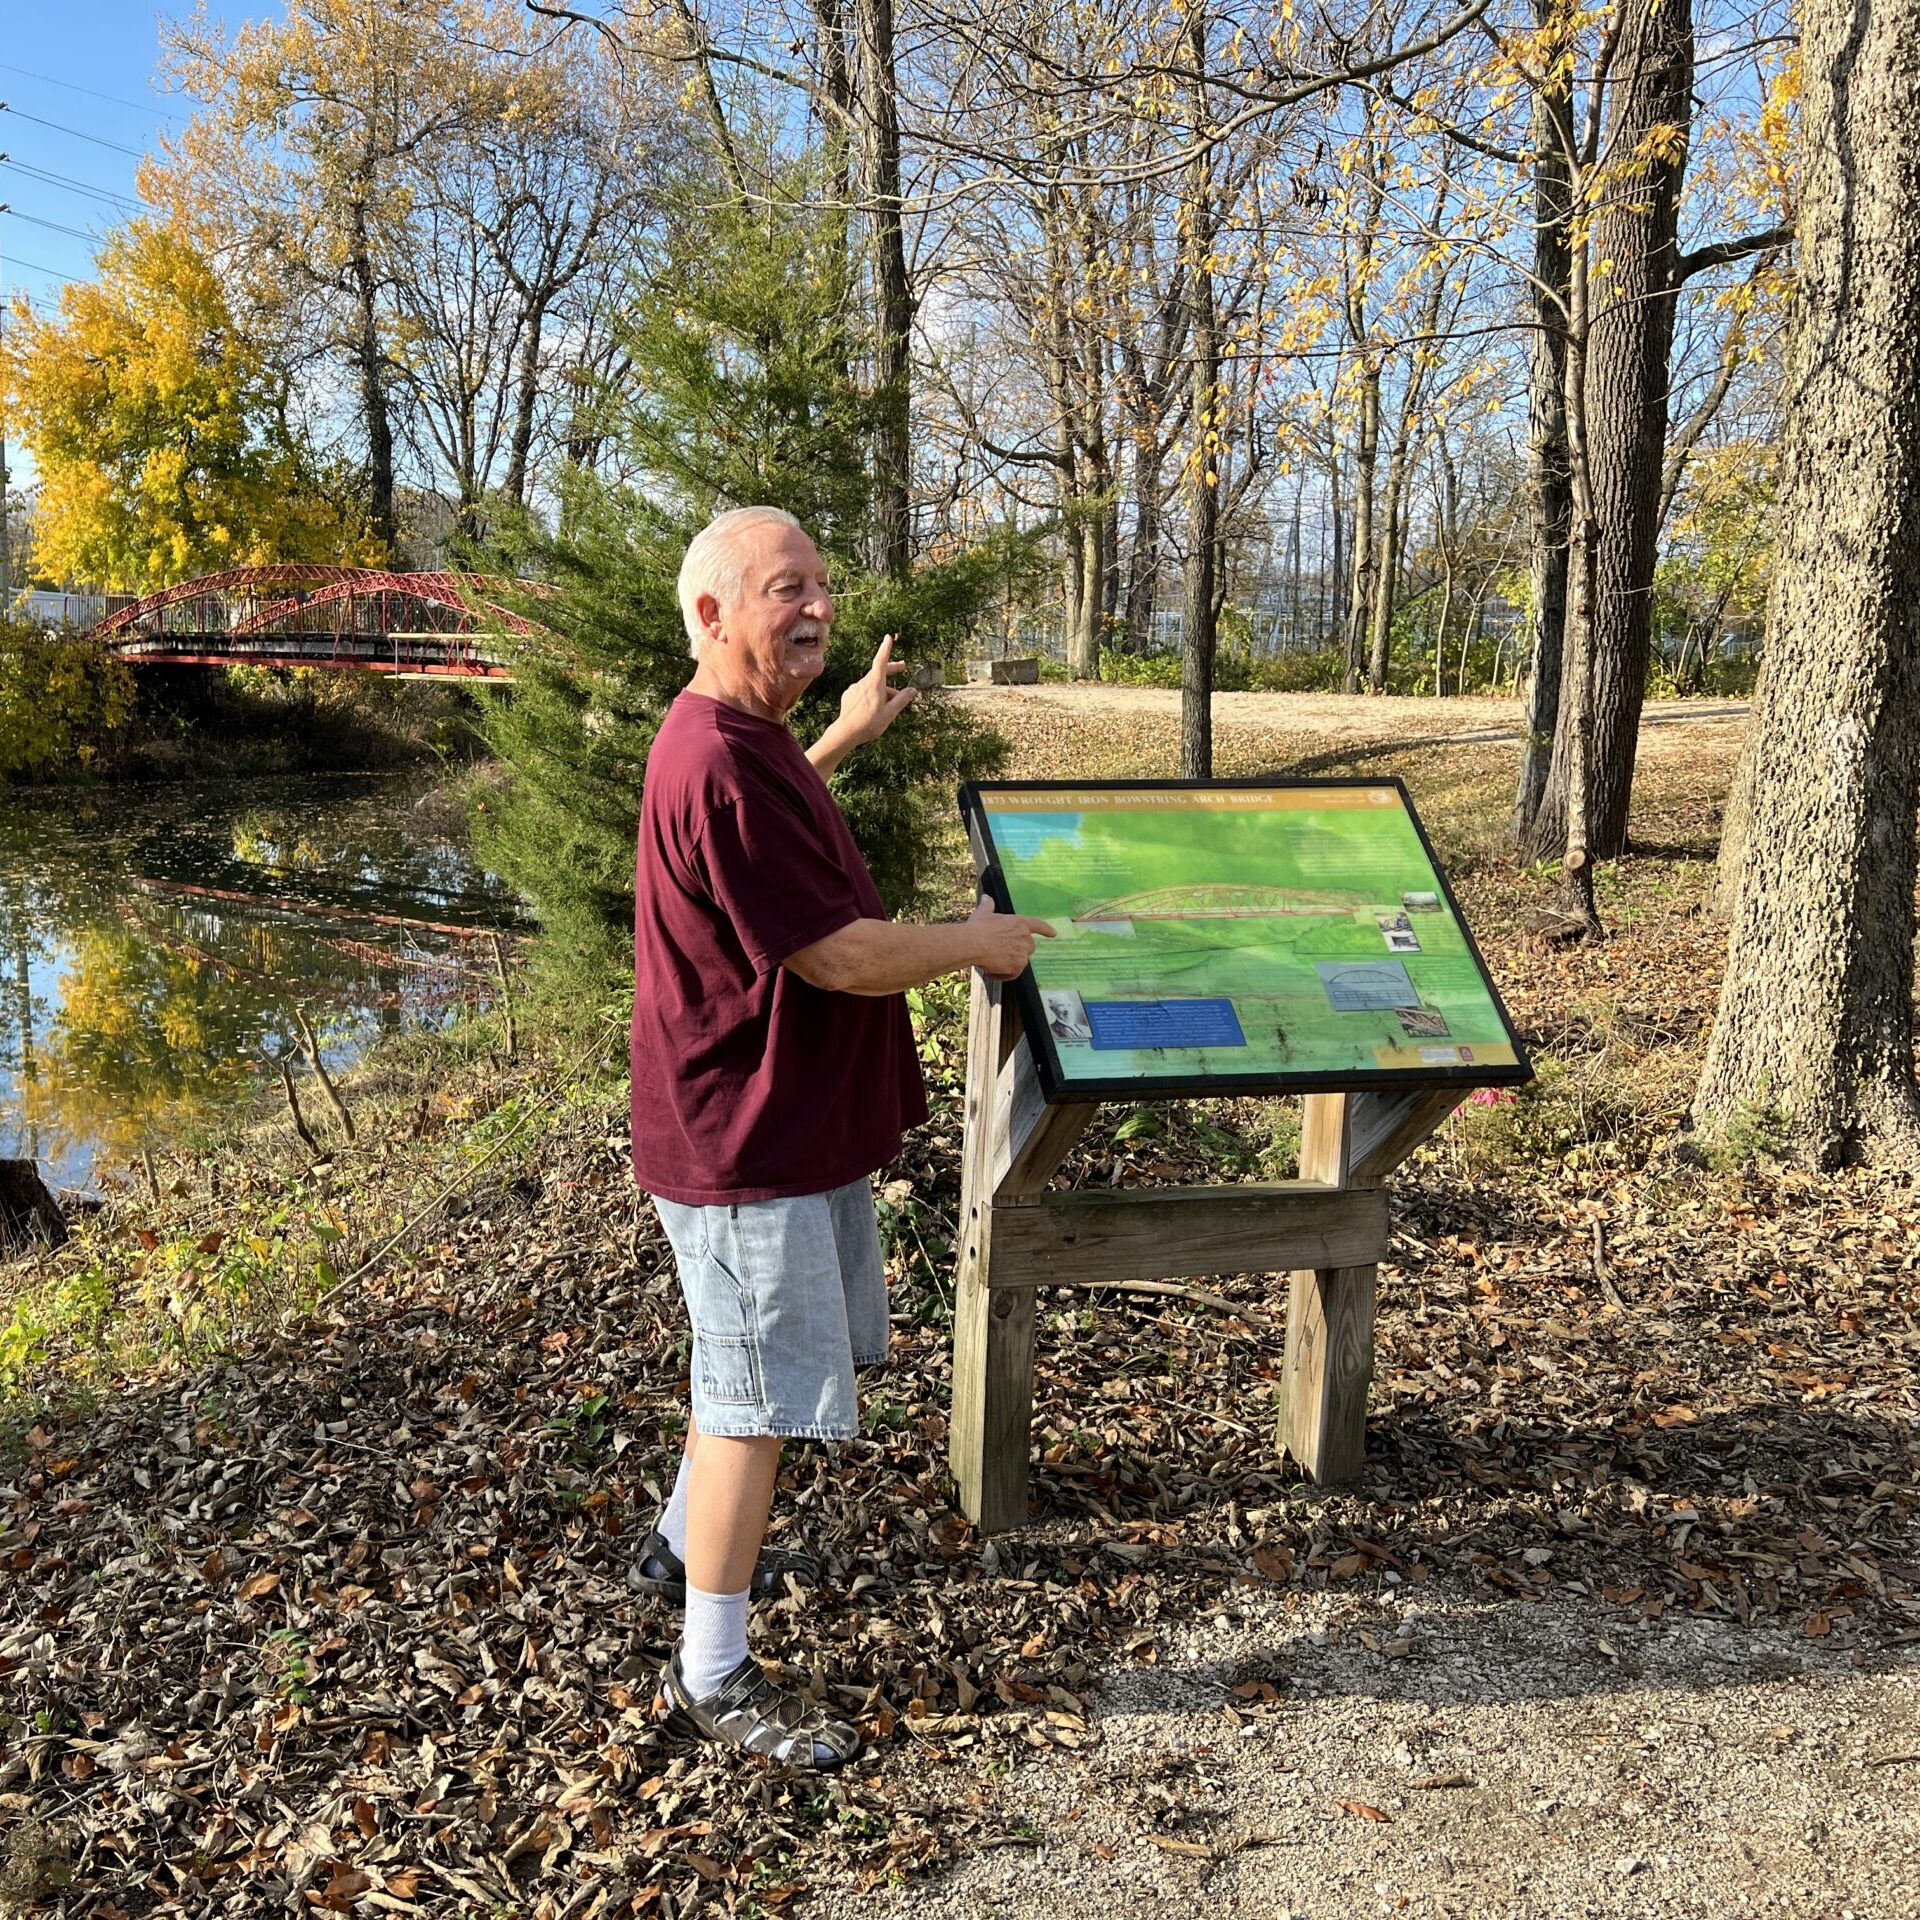 A tour guide shares from an interpretive panel along the trails